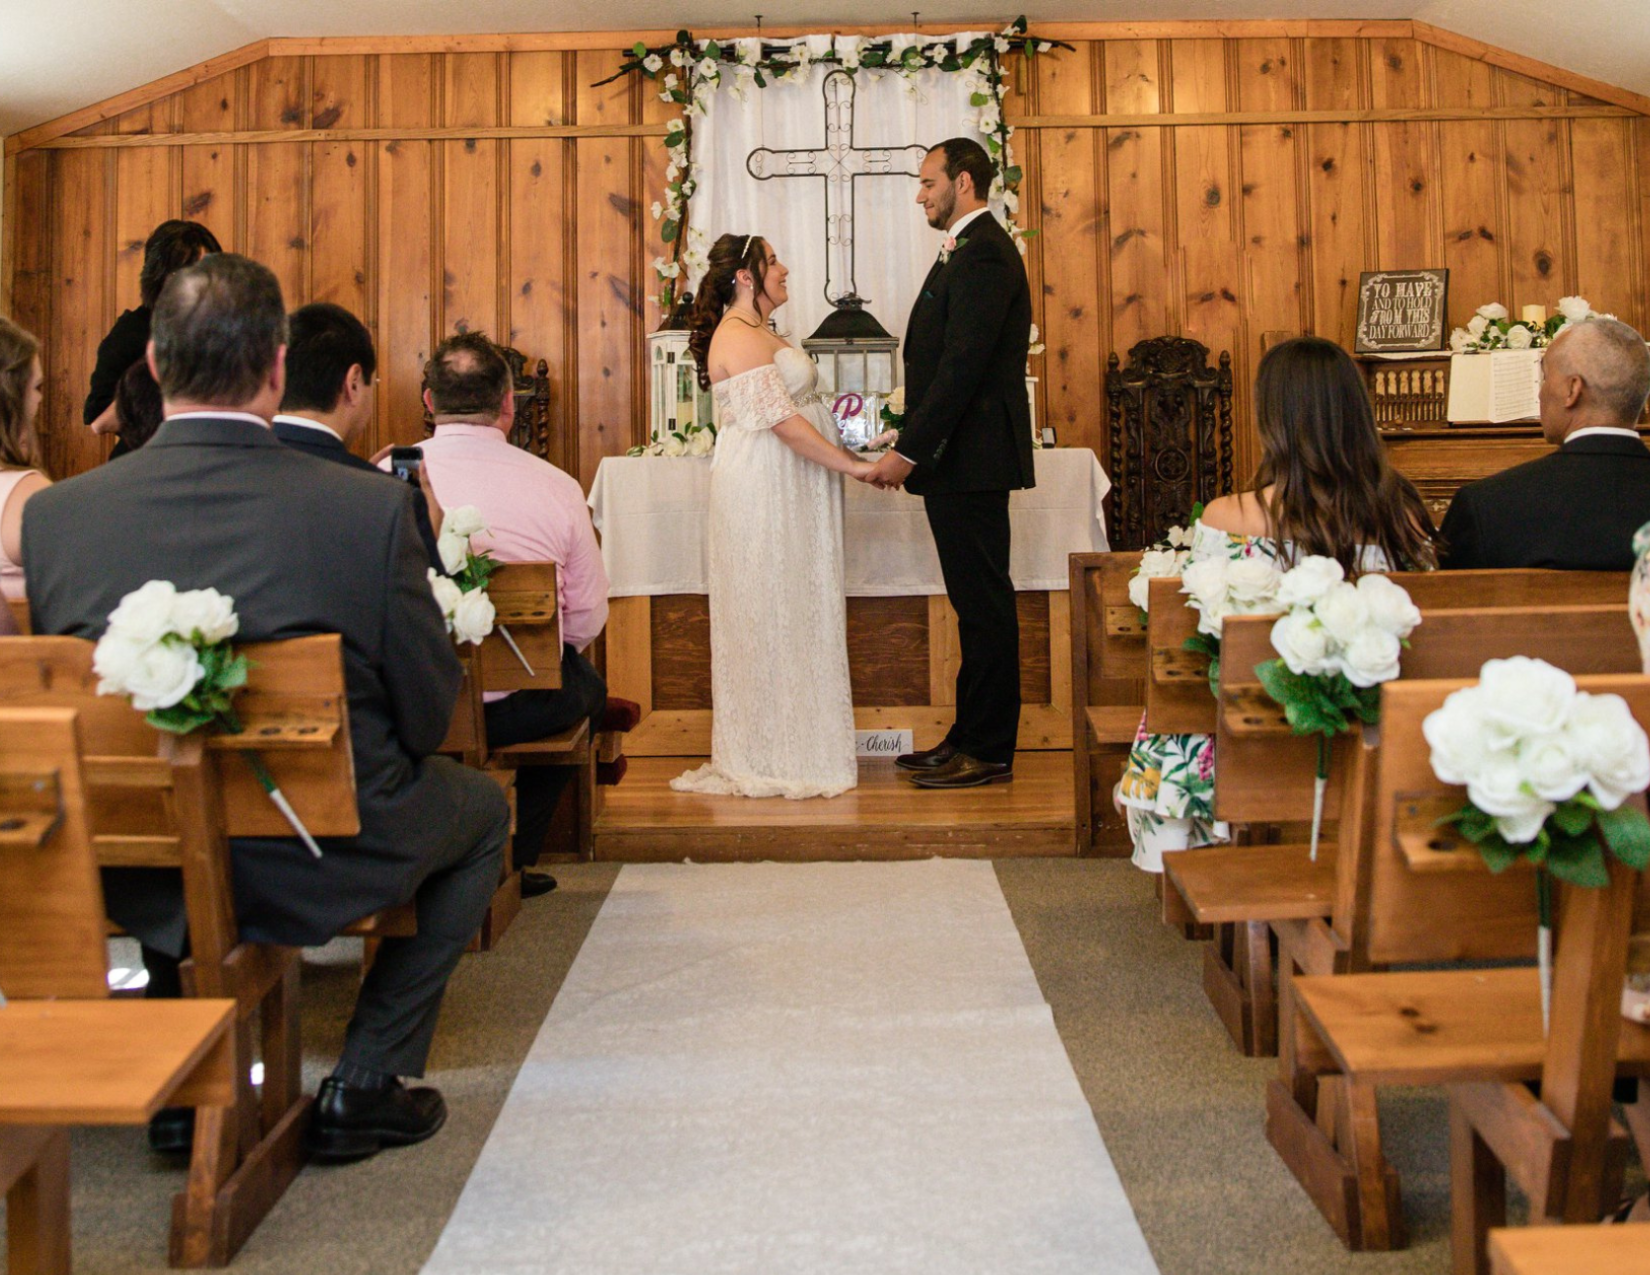 An elopement wedding with the newly wed couple saying their vows in a small wedding chapel in Cave Creek, Arizona